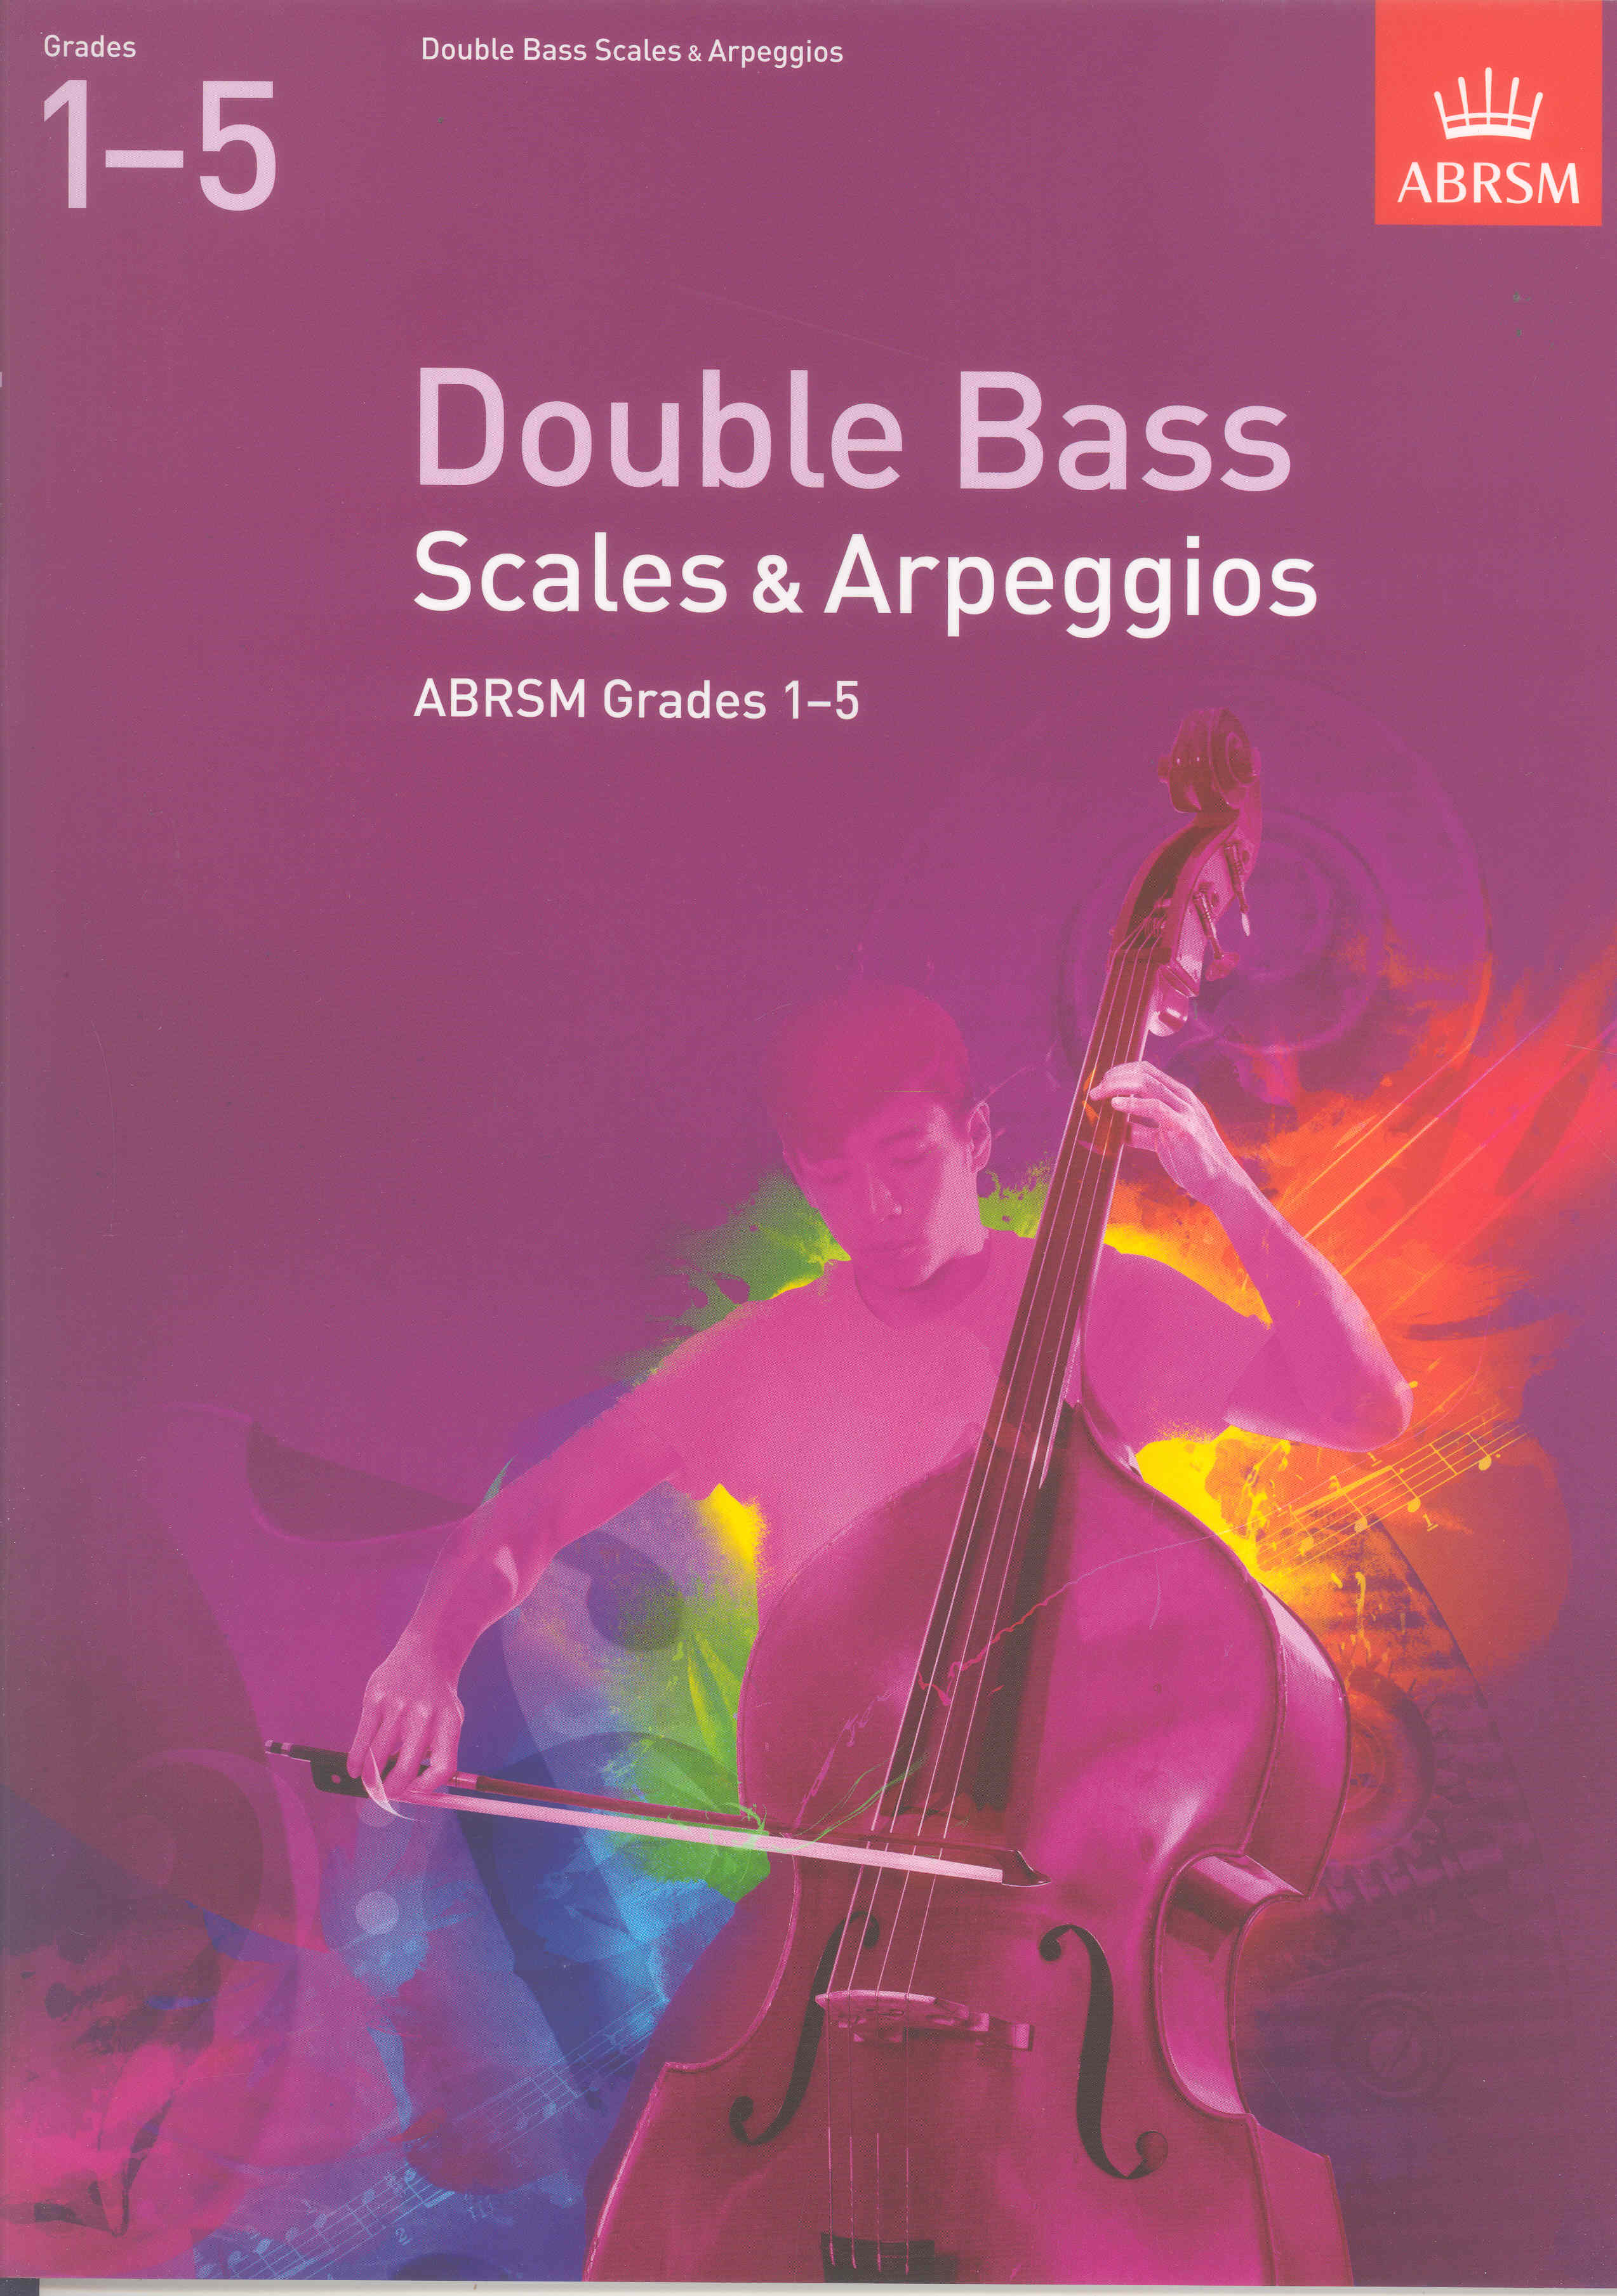 Double Bass Scales & Arpeggios 2012 Gr 1-5 Abrsm Sheet Music Songbook